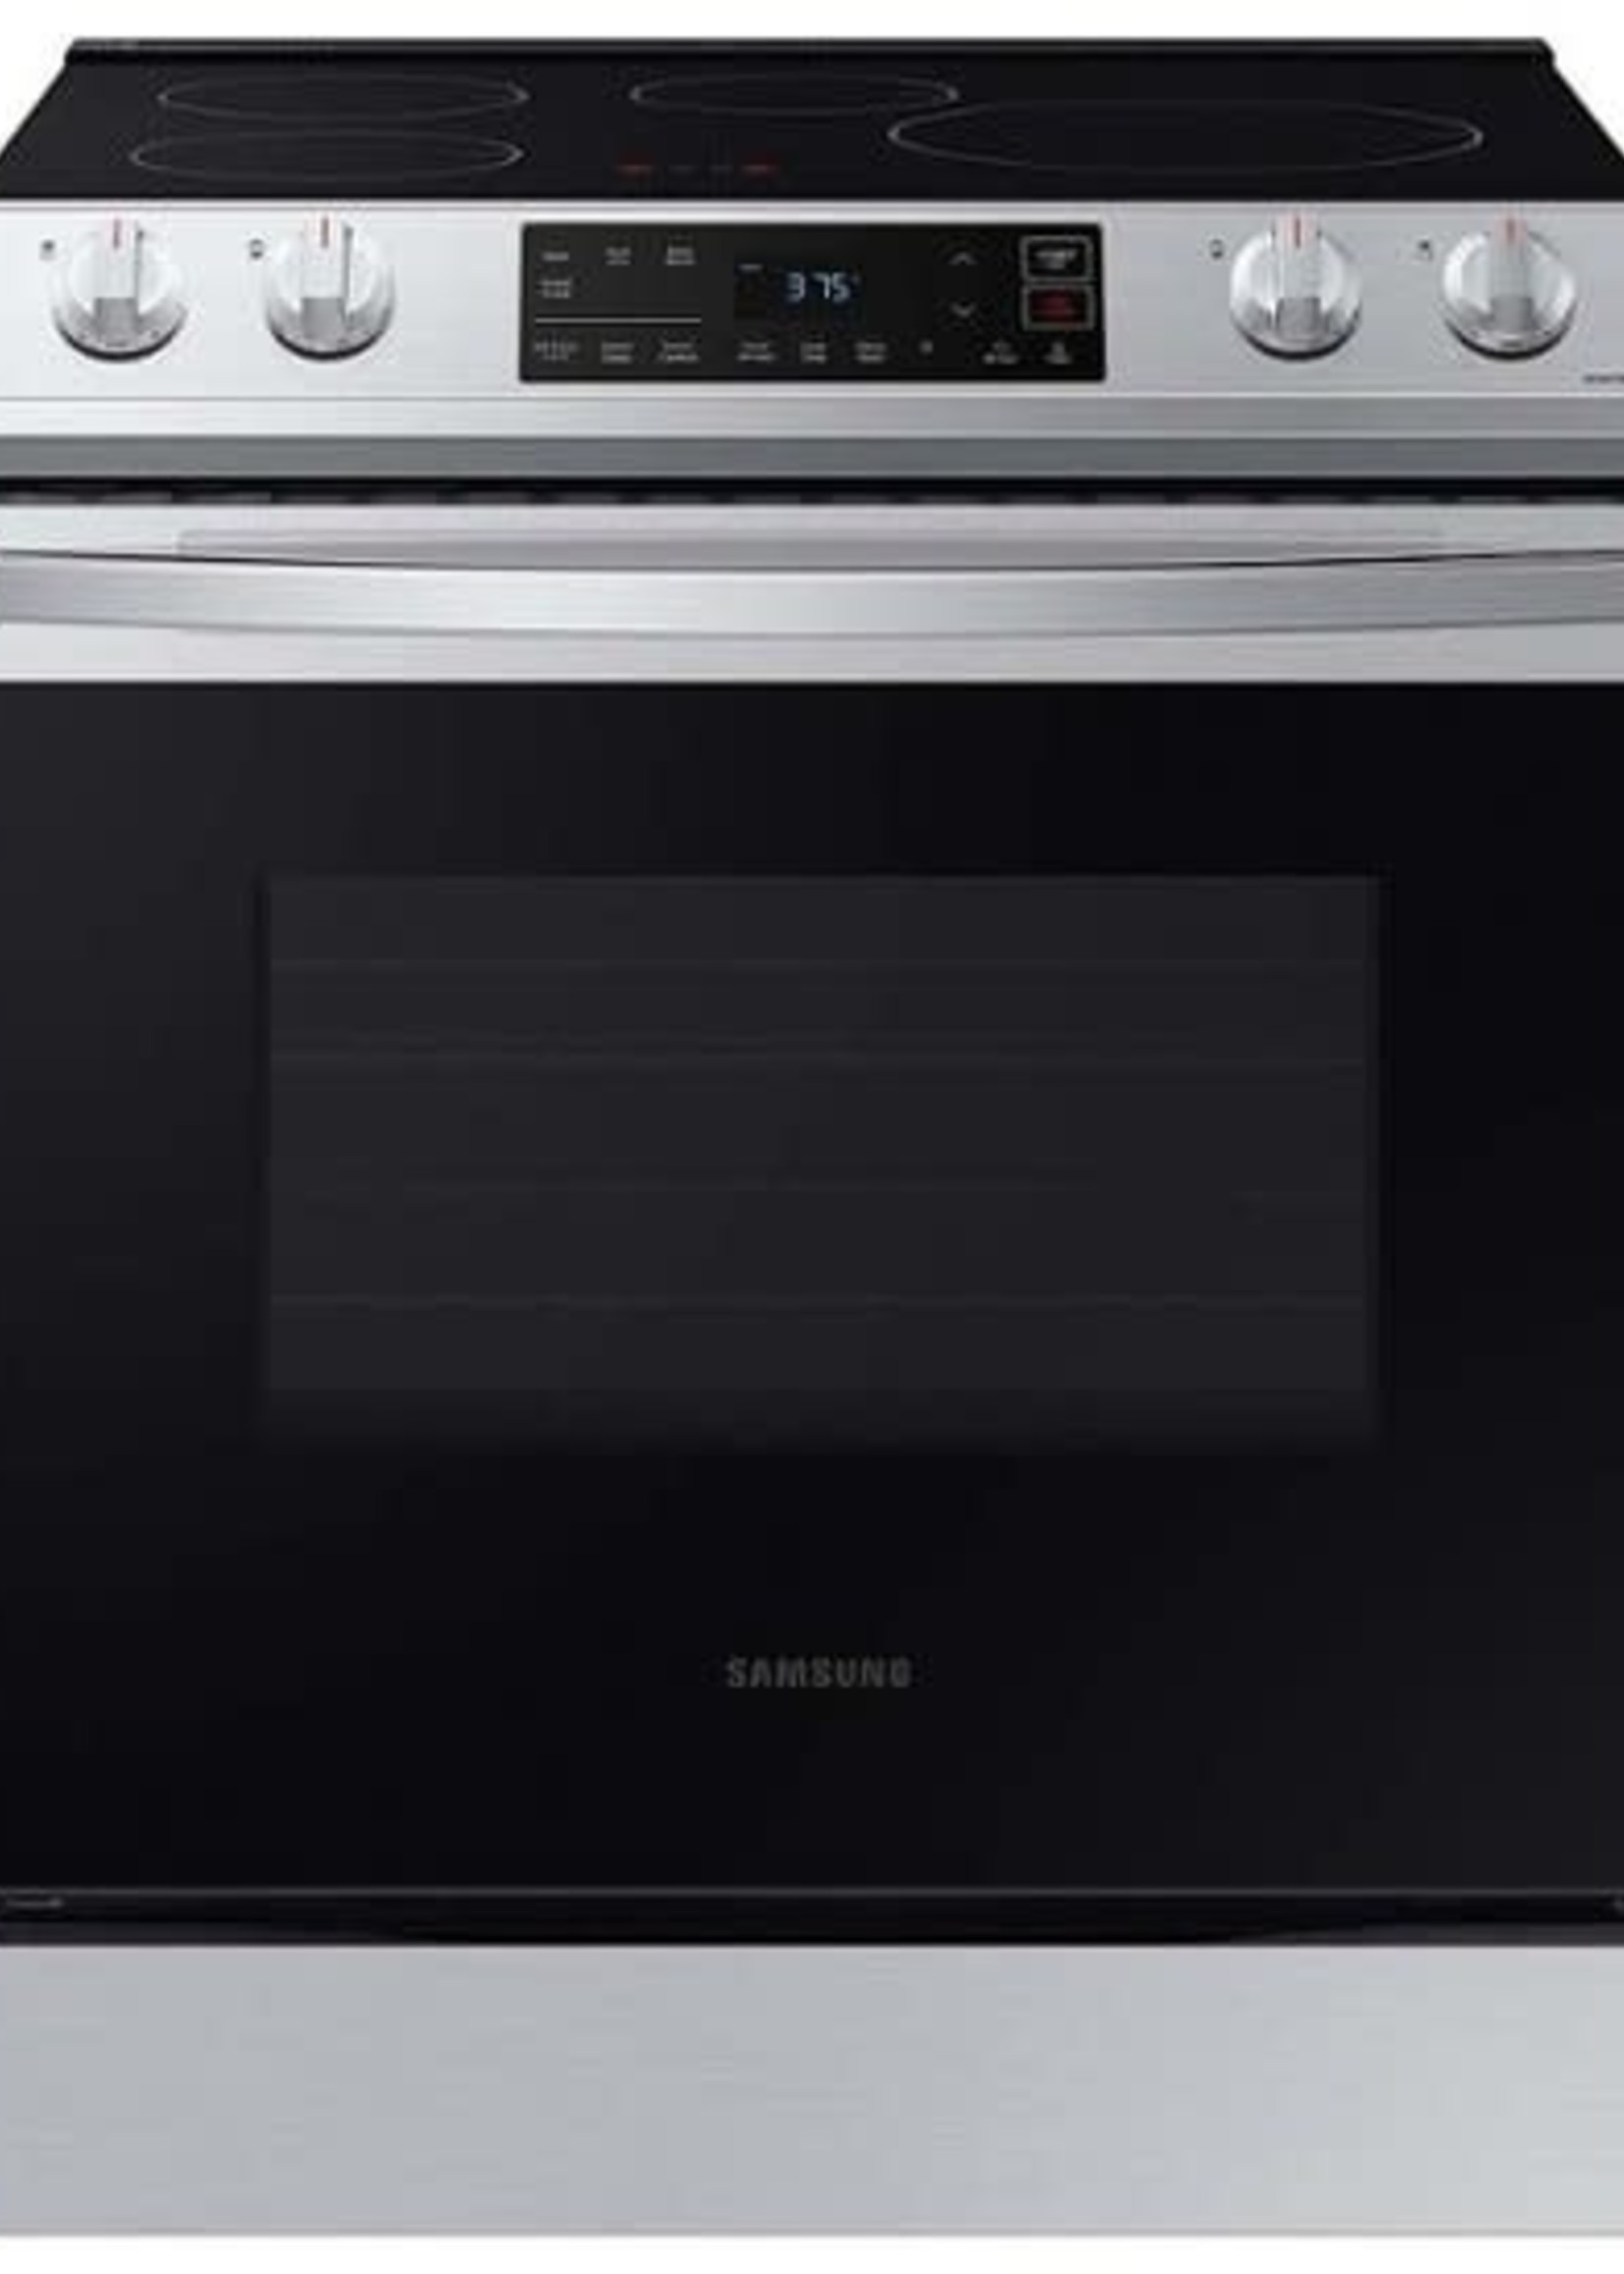 Samsung *  SAMSUNG  NE63B8211SS  30 in. 6.3 cu. ft. Slide-In Induction Range with Self-Cleaning Oven in Stainless Steel